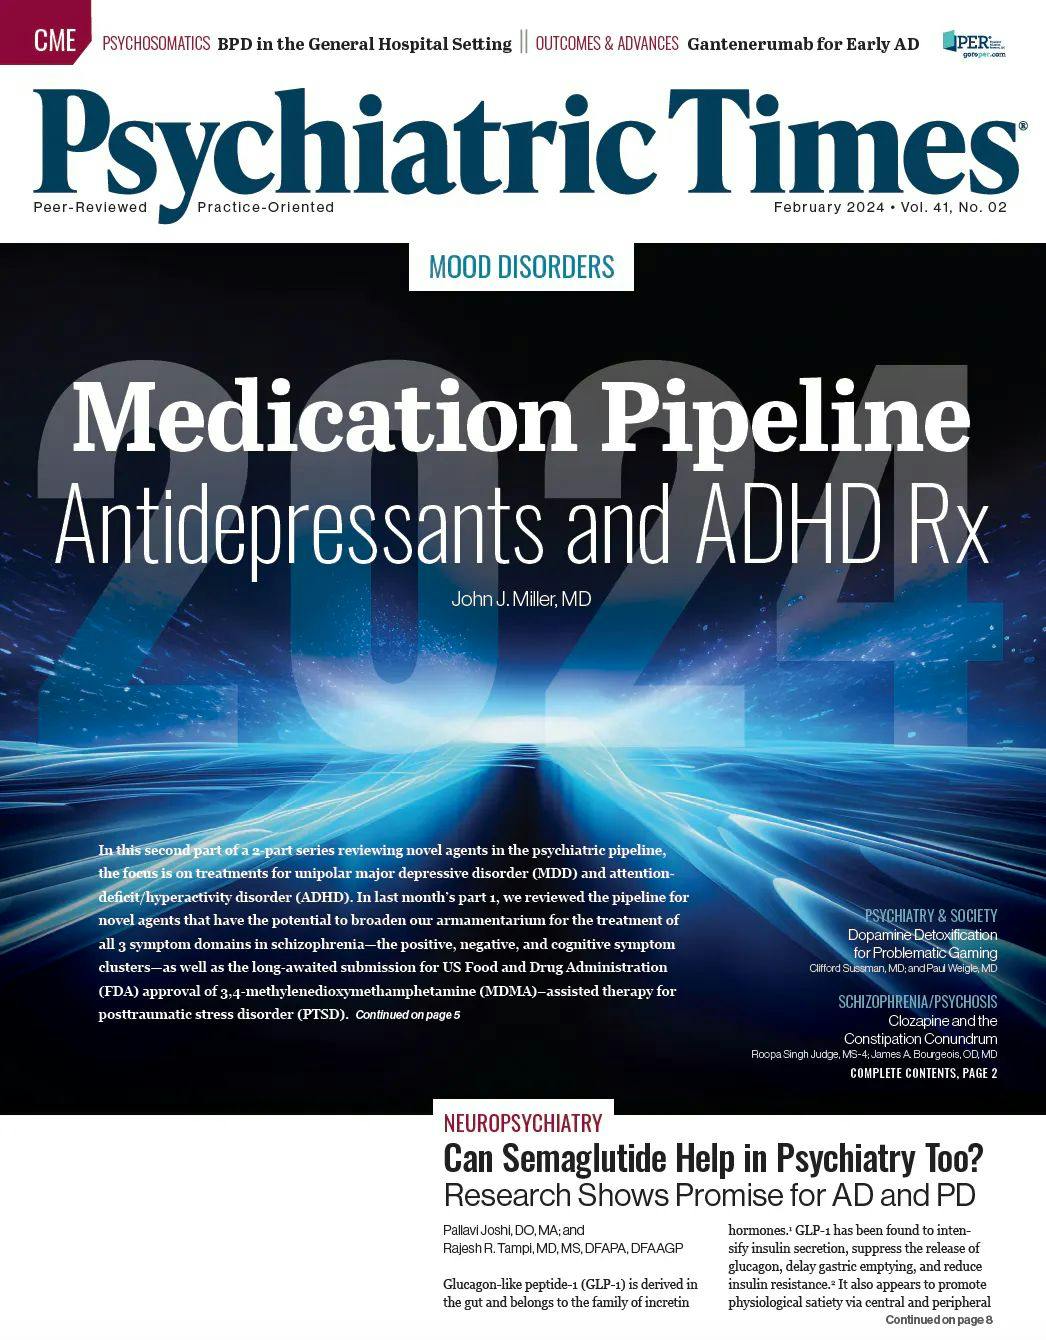 The experts weighed in on a wide variety of psychiatric issues for the February 2024 issue of Psychiatric Times.